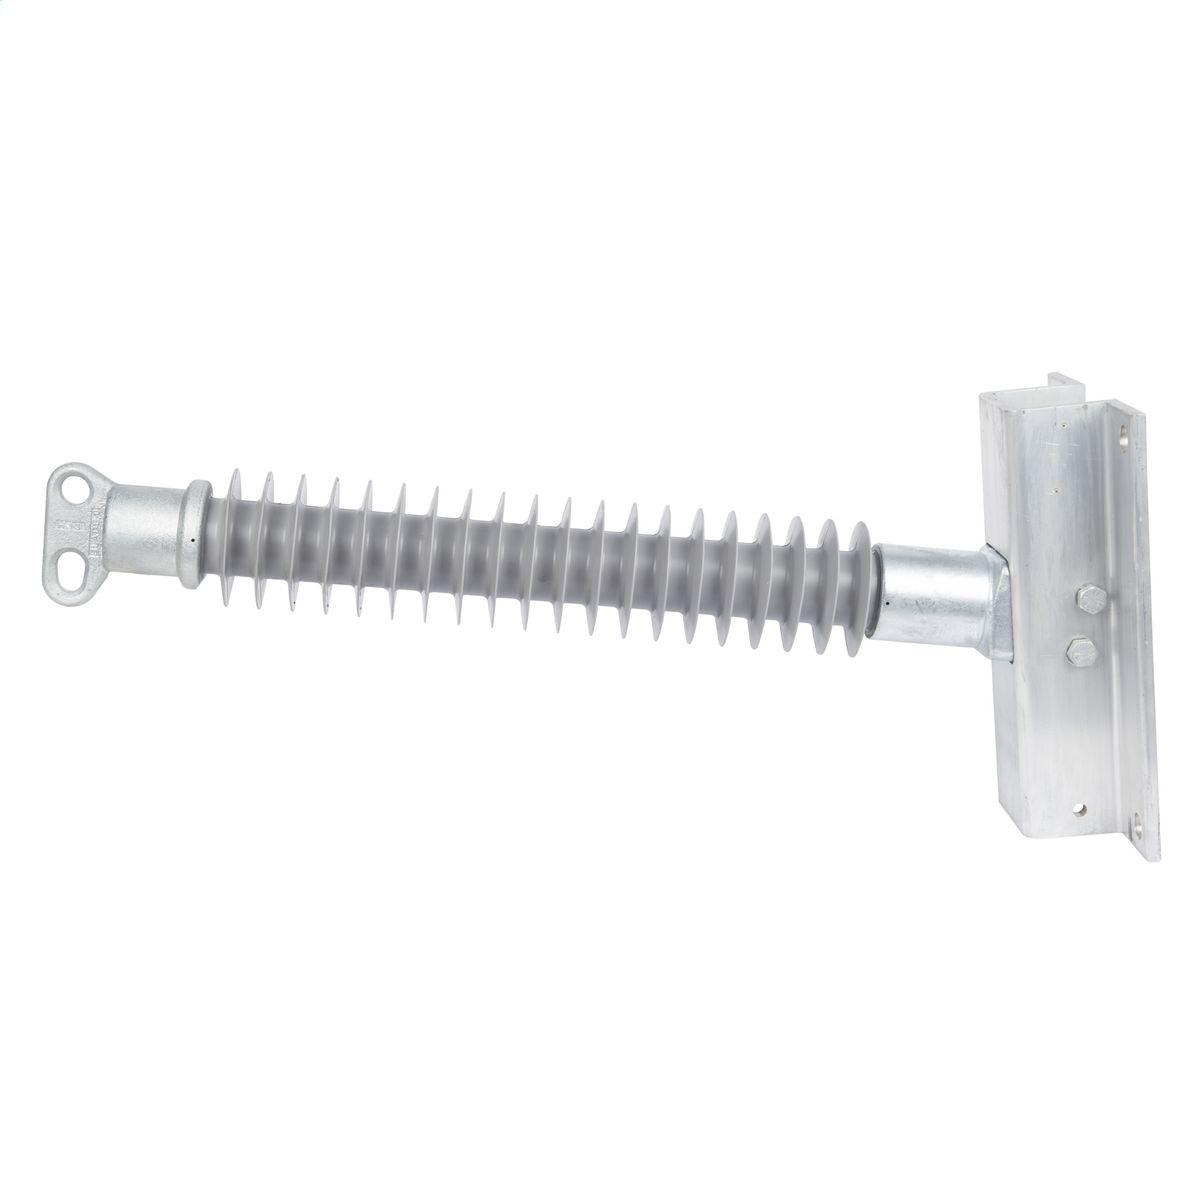 Hubbell P250041S0040 2.5" Line Post, Std. Leak, 2 Hole blade, Aluminum Flat base 8x13 7/8" bolts  ; Made from hydrophobic silicone polymer ; 